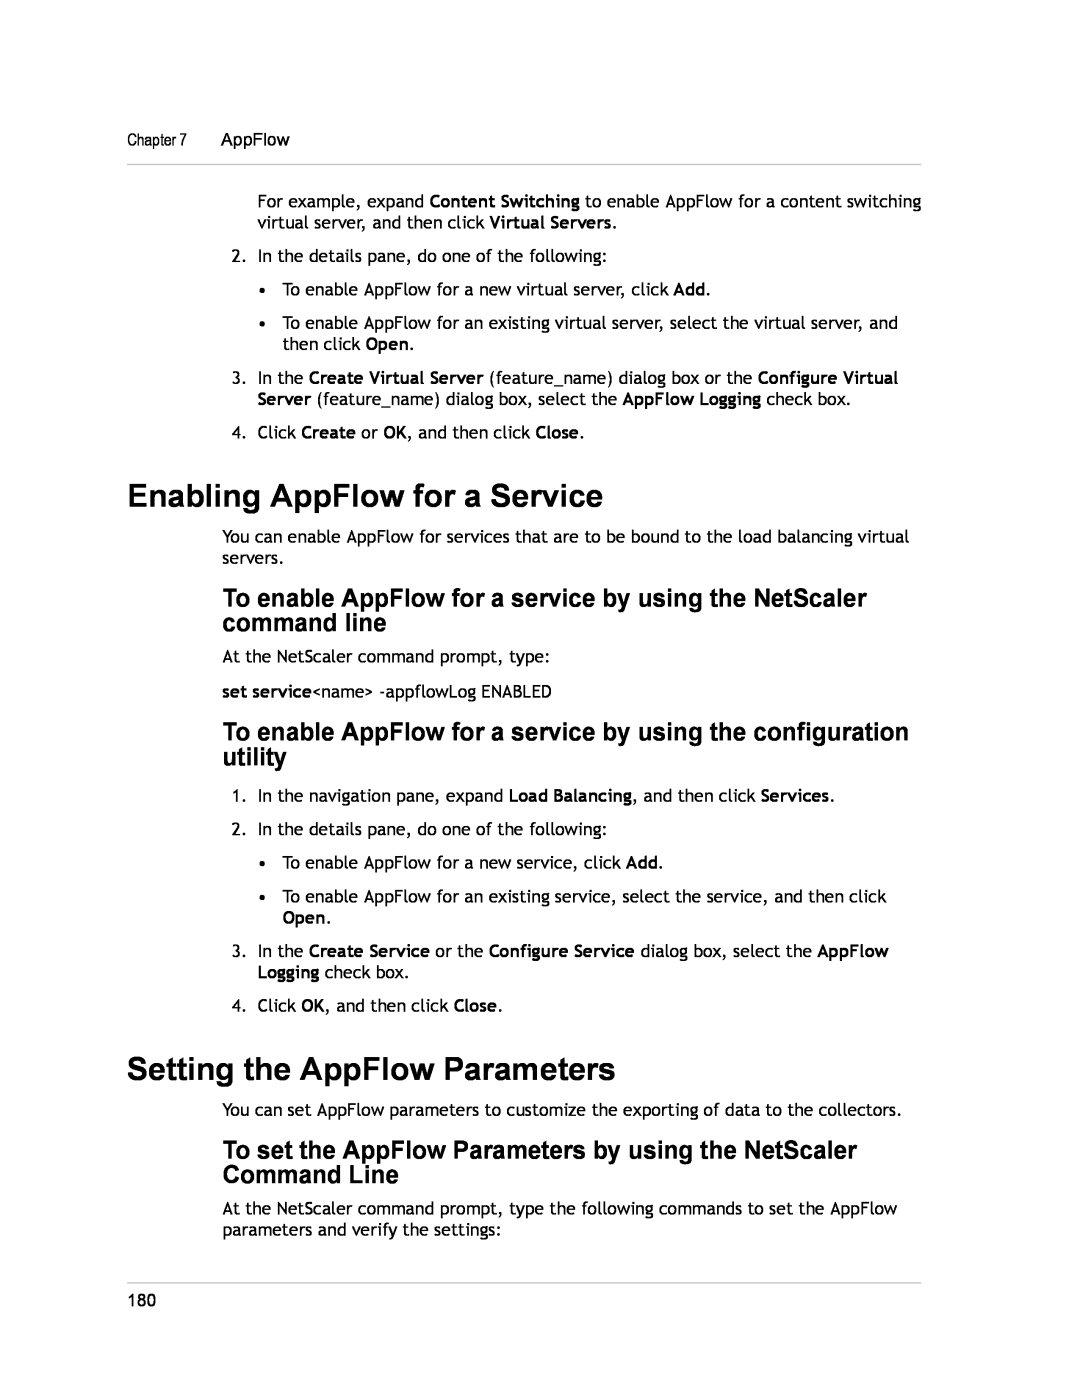 Citrix Systems CITRIX NETSCALER 9.3 manual Enabling AppFlow for a Service, Setting the AppFlow Parameters 